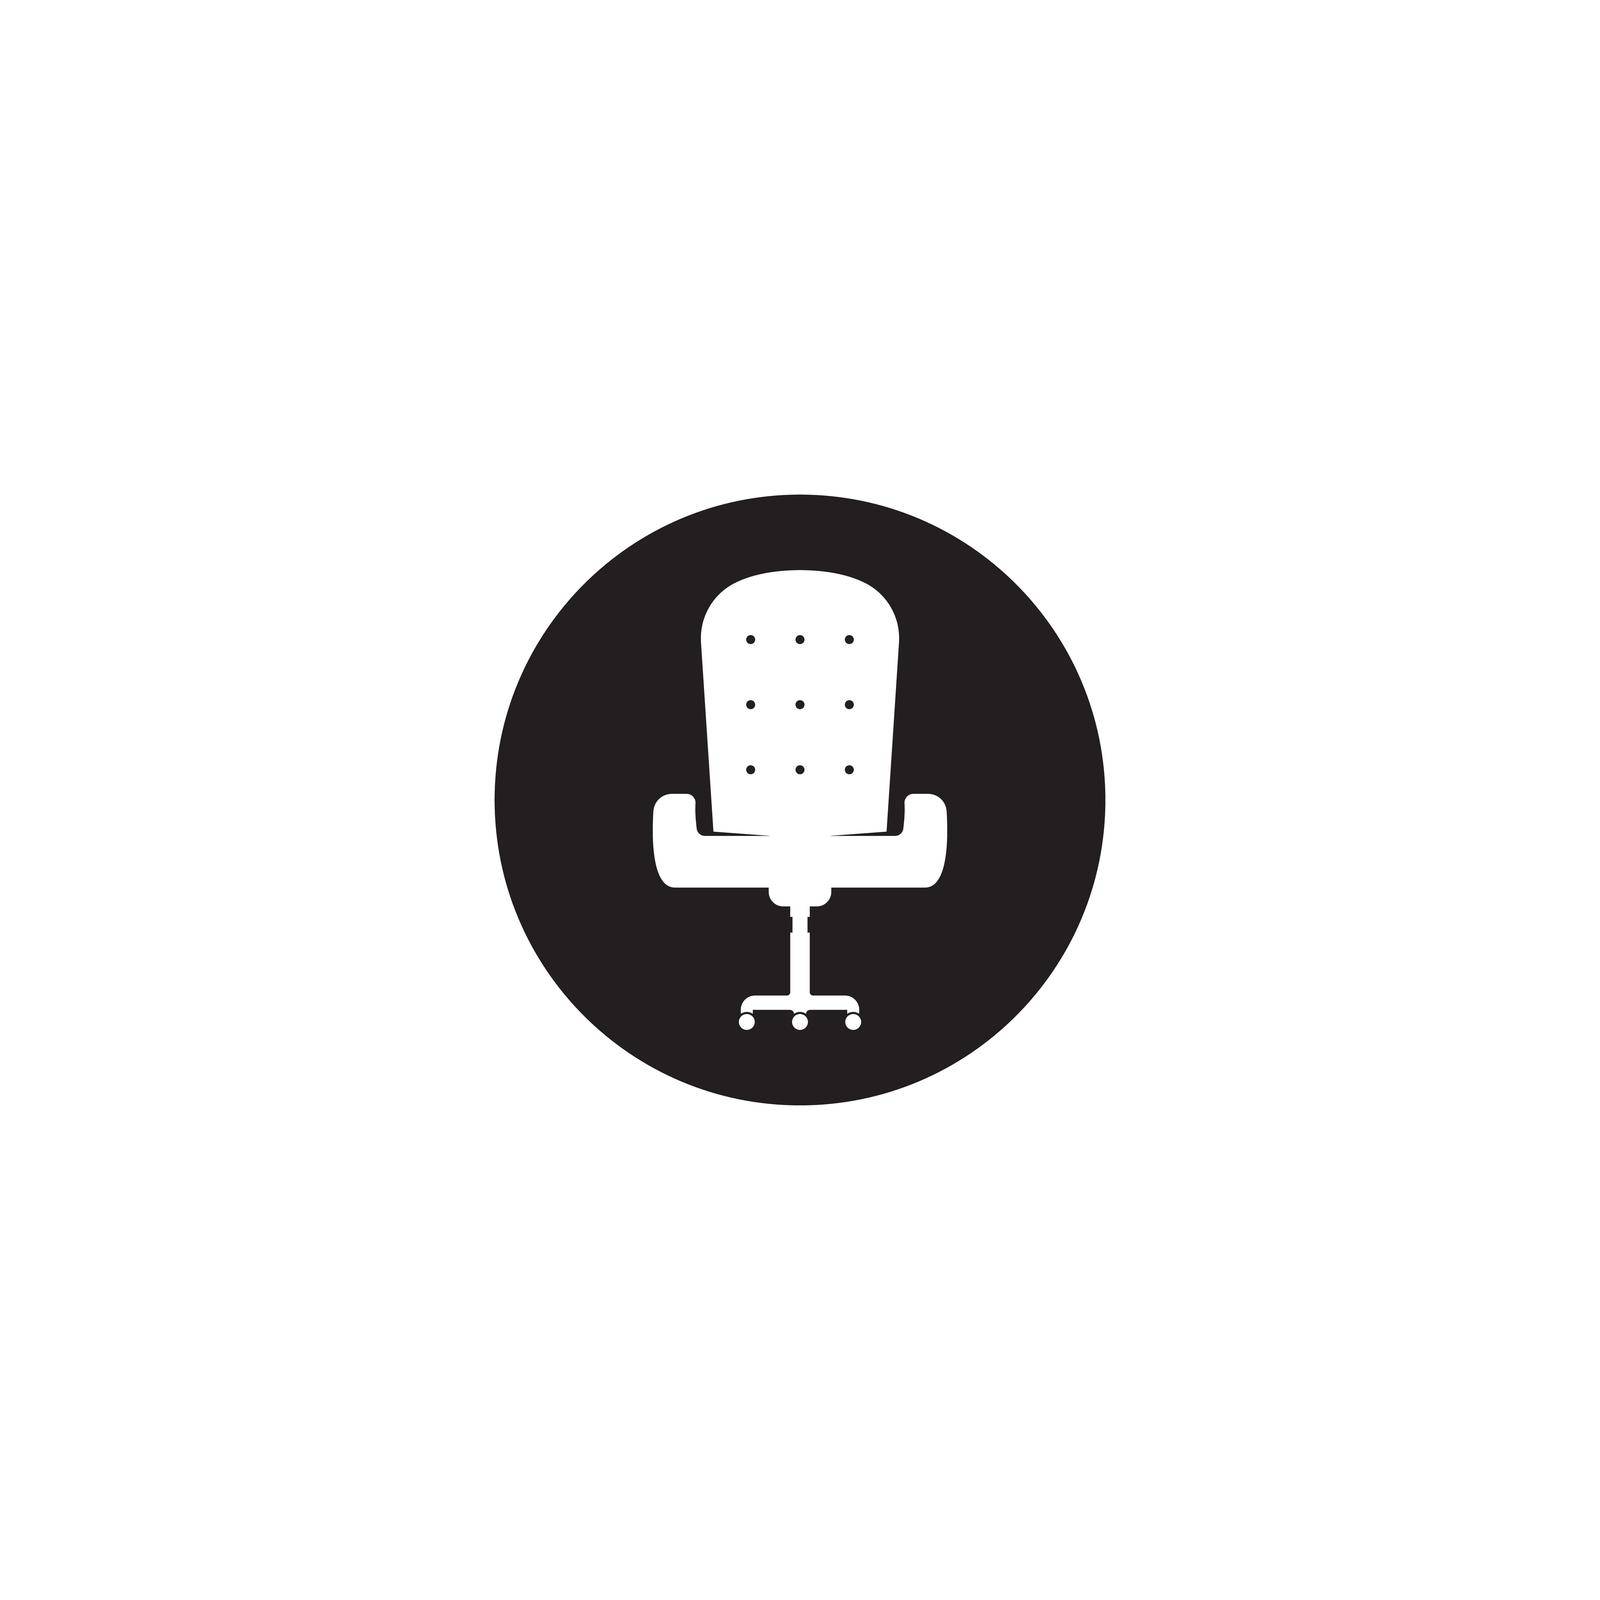 office armchair icon. by rnking